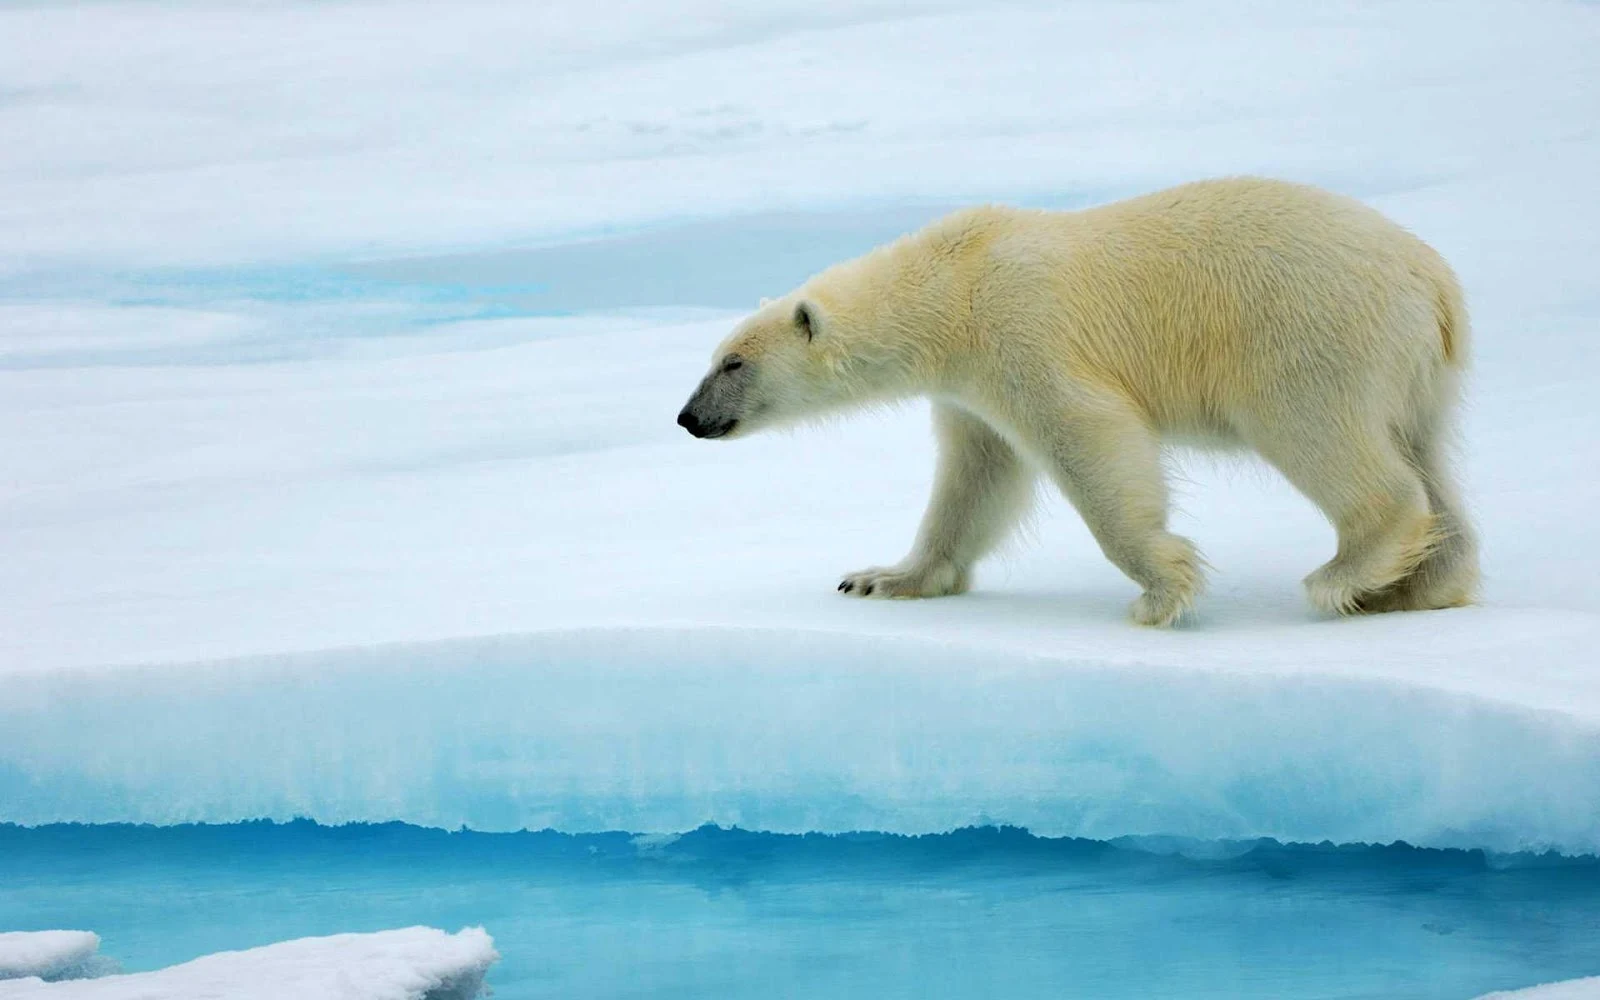 Polar bears can disappear before it was considered